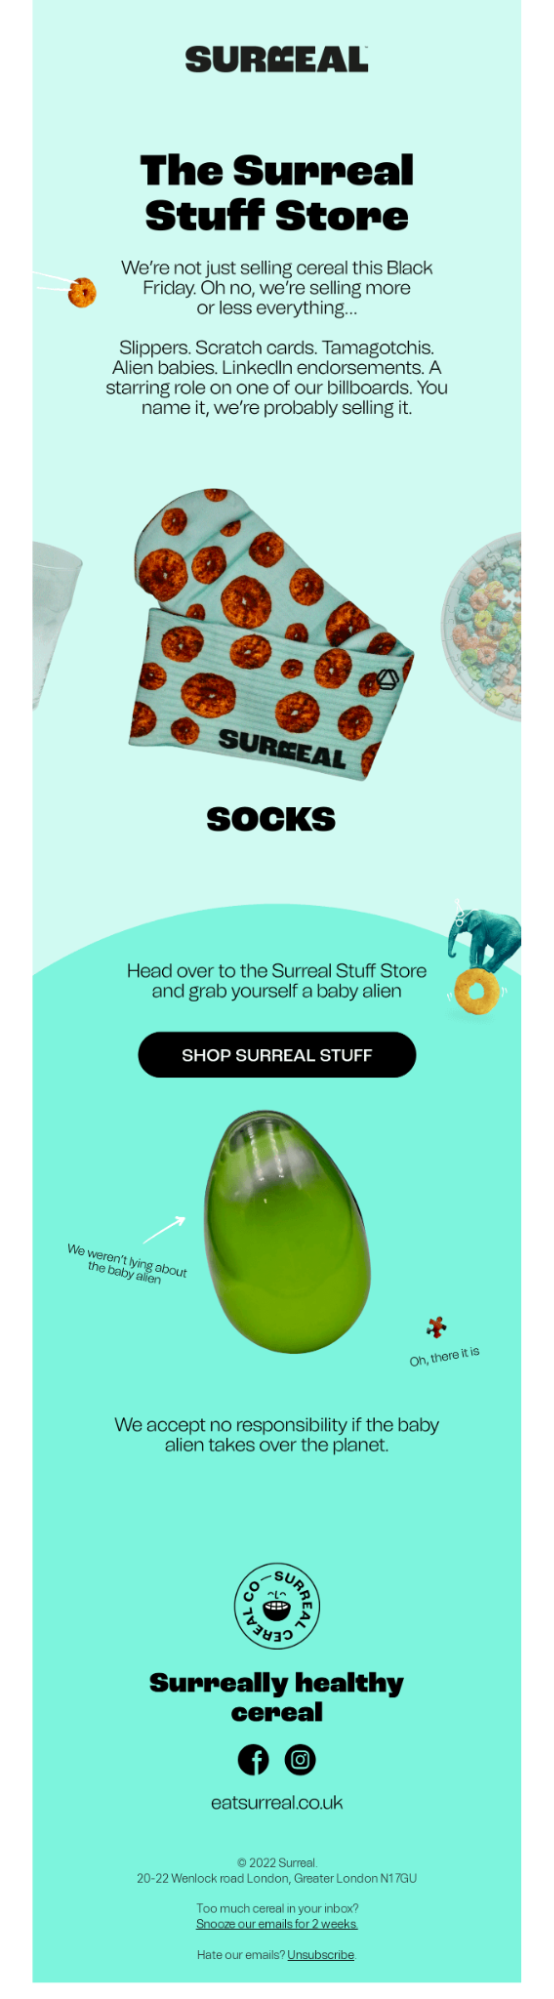 e-mail newsletter example - surreal stuff store